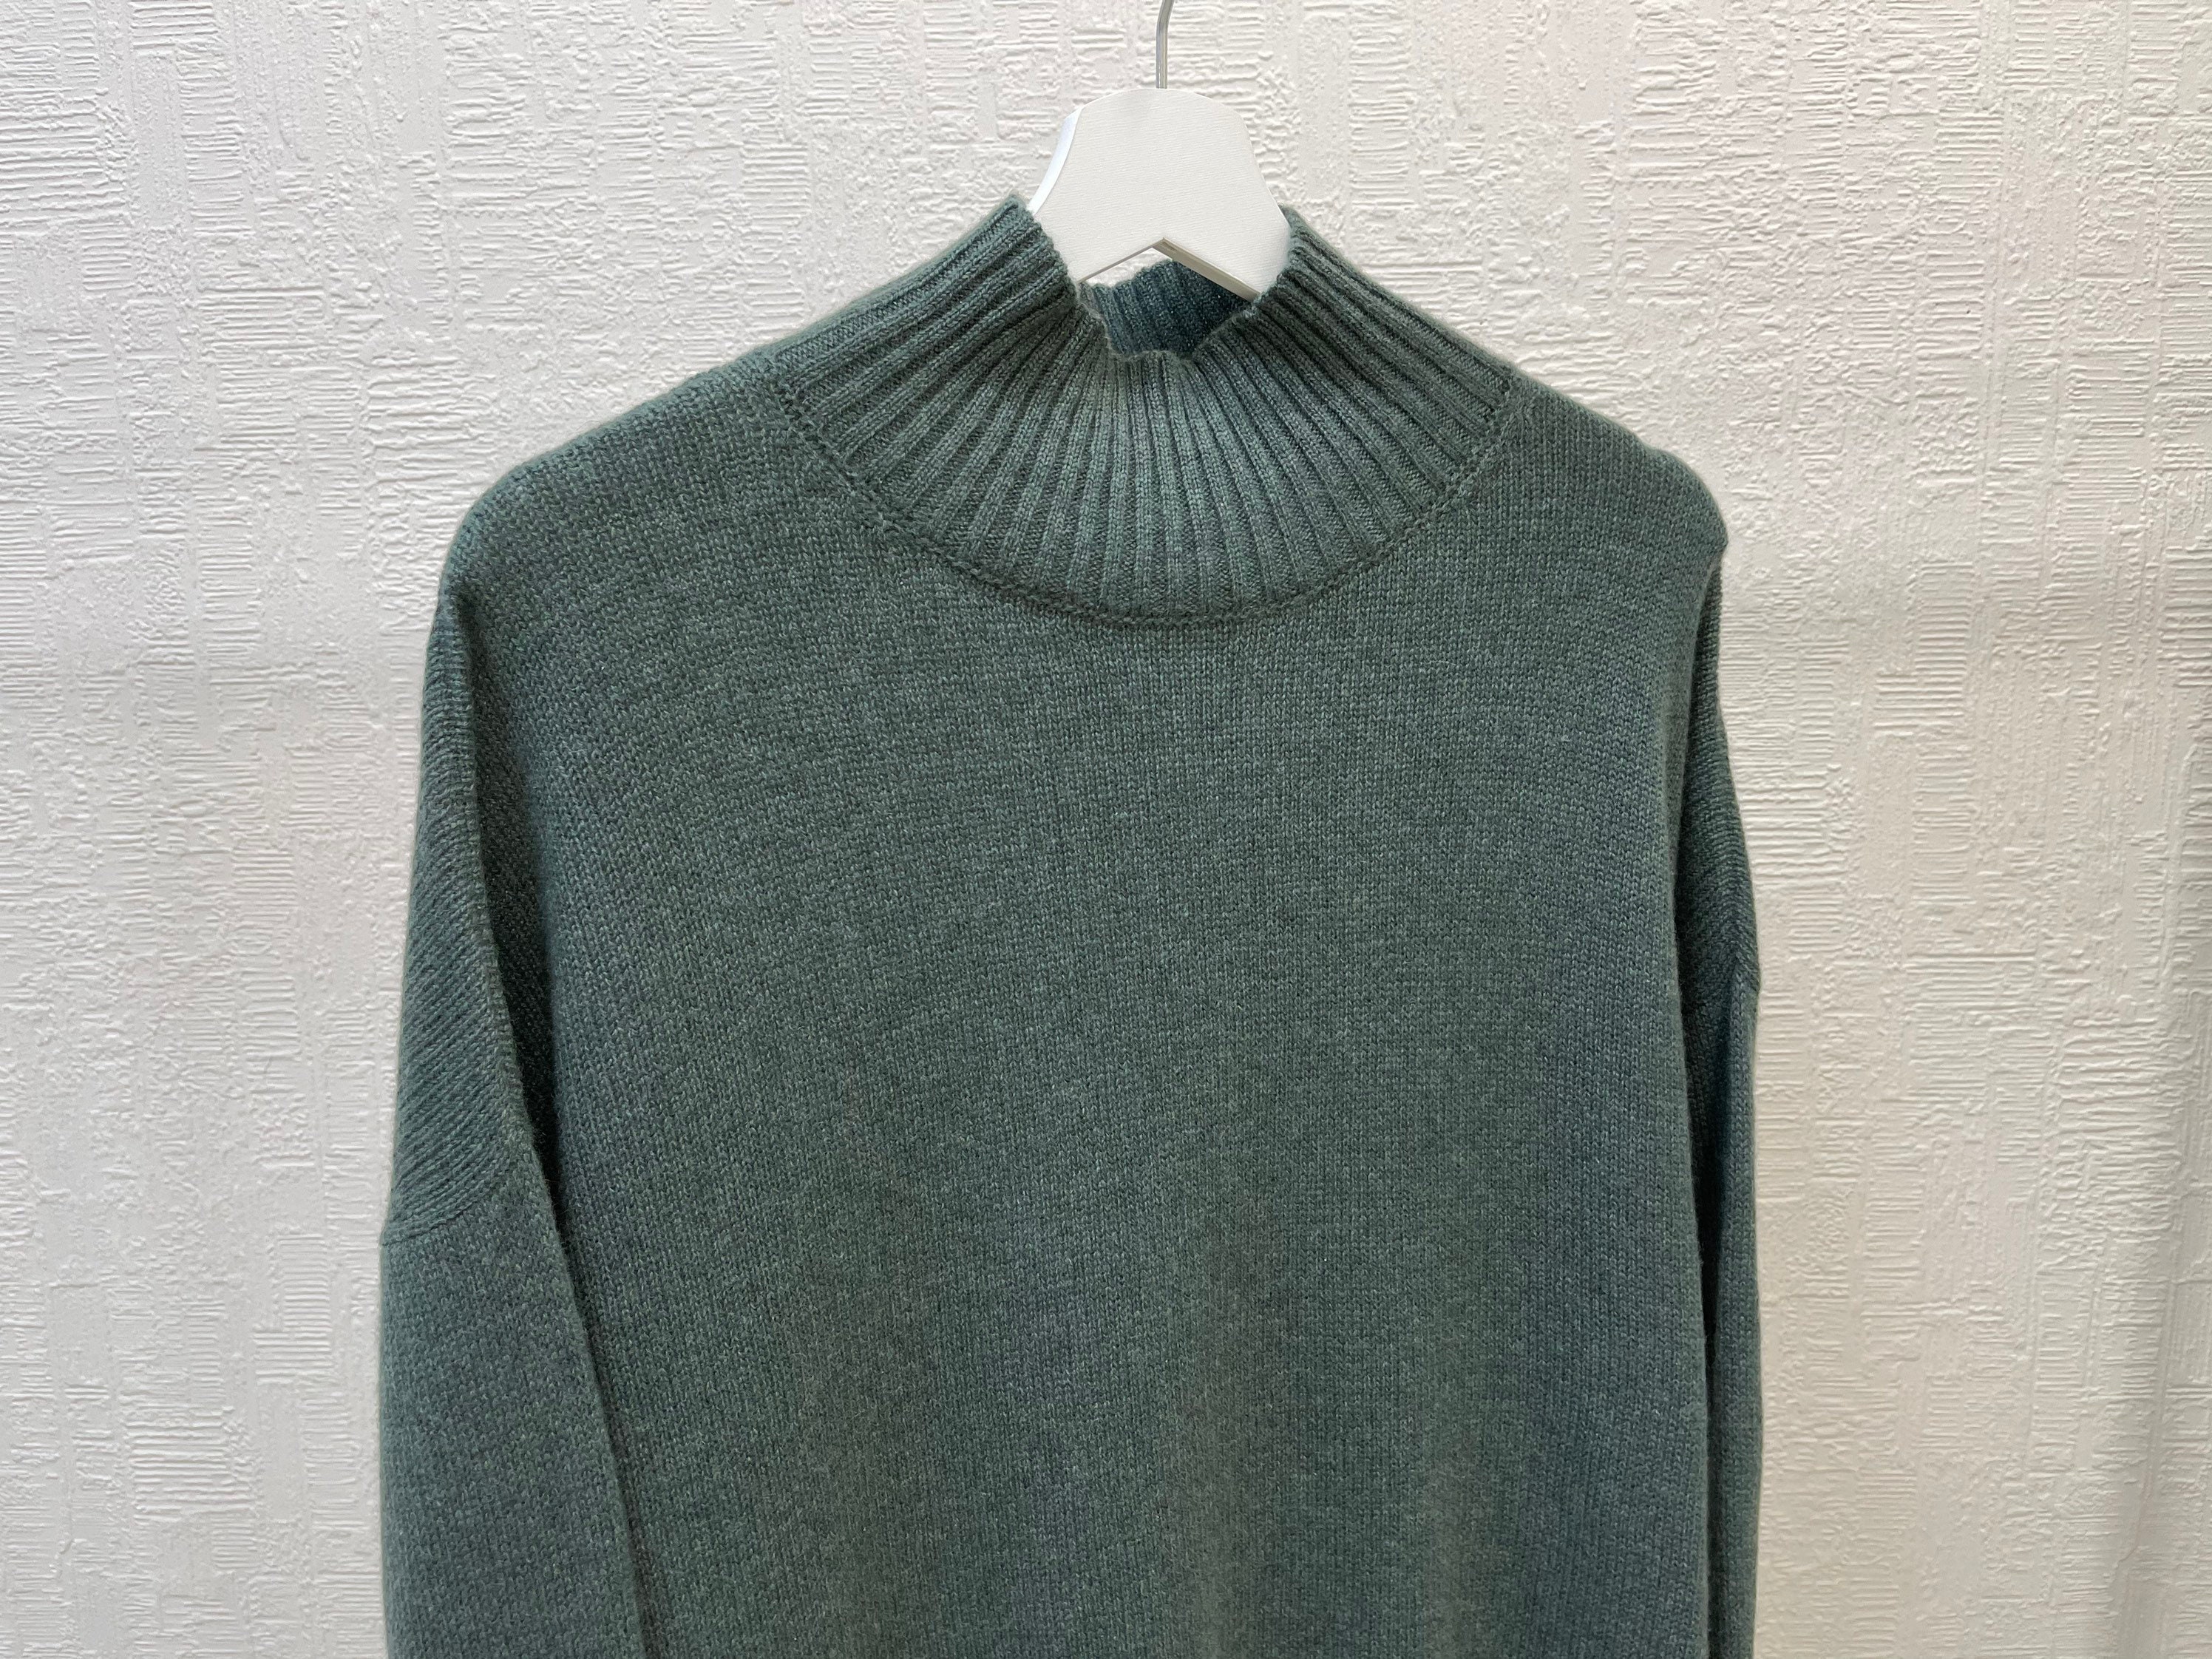 Green pure cashmere sweater for women Minimalist soft and | Etsy